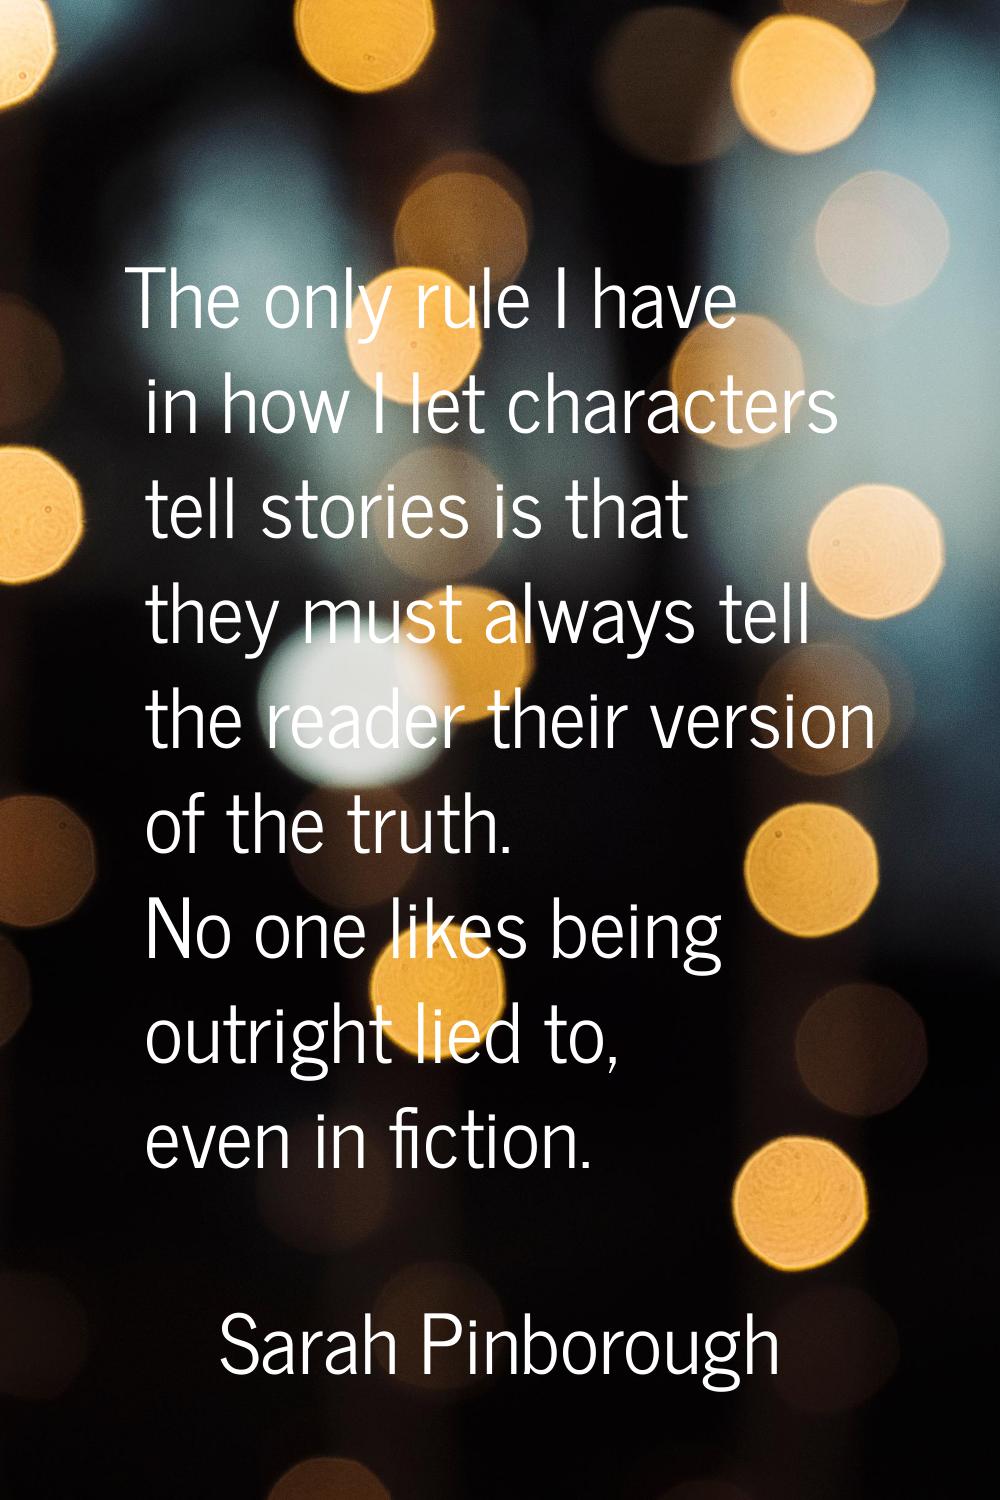 The only rule I have in how I let characters tell stories is that they must always tell the reader 